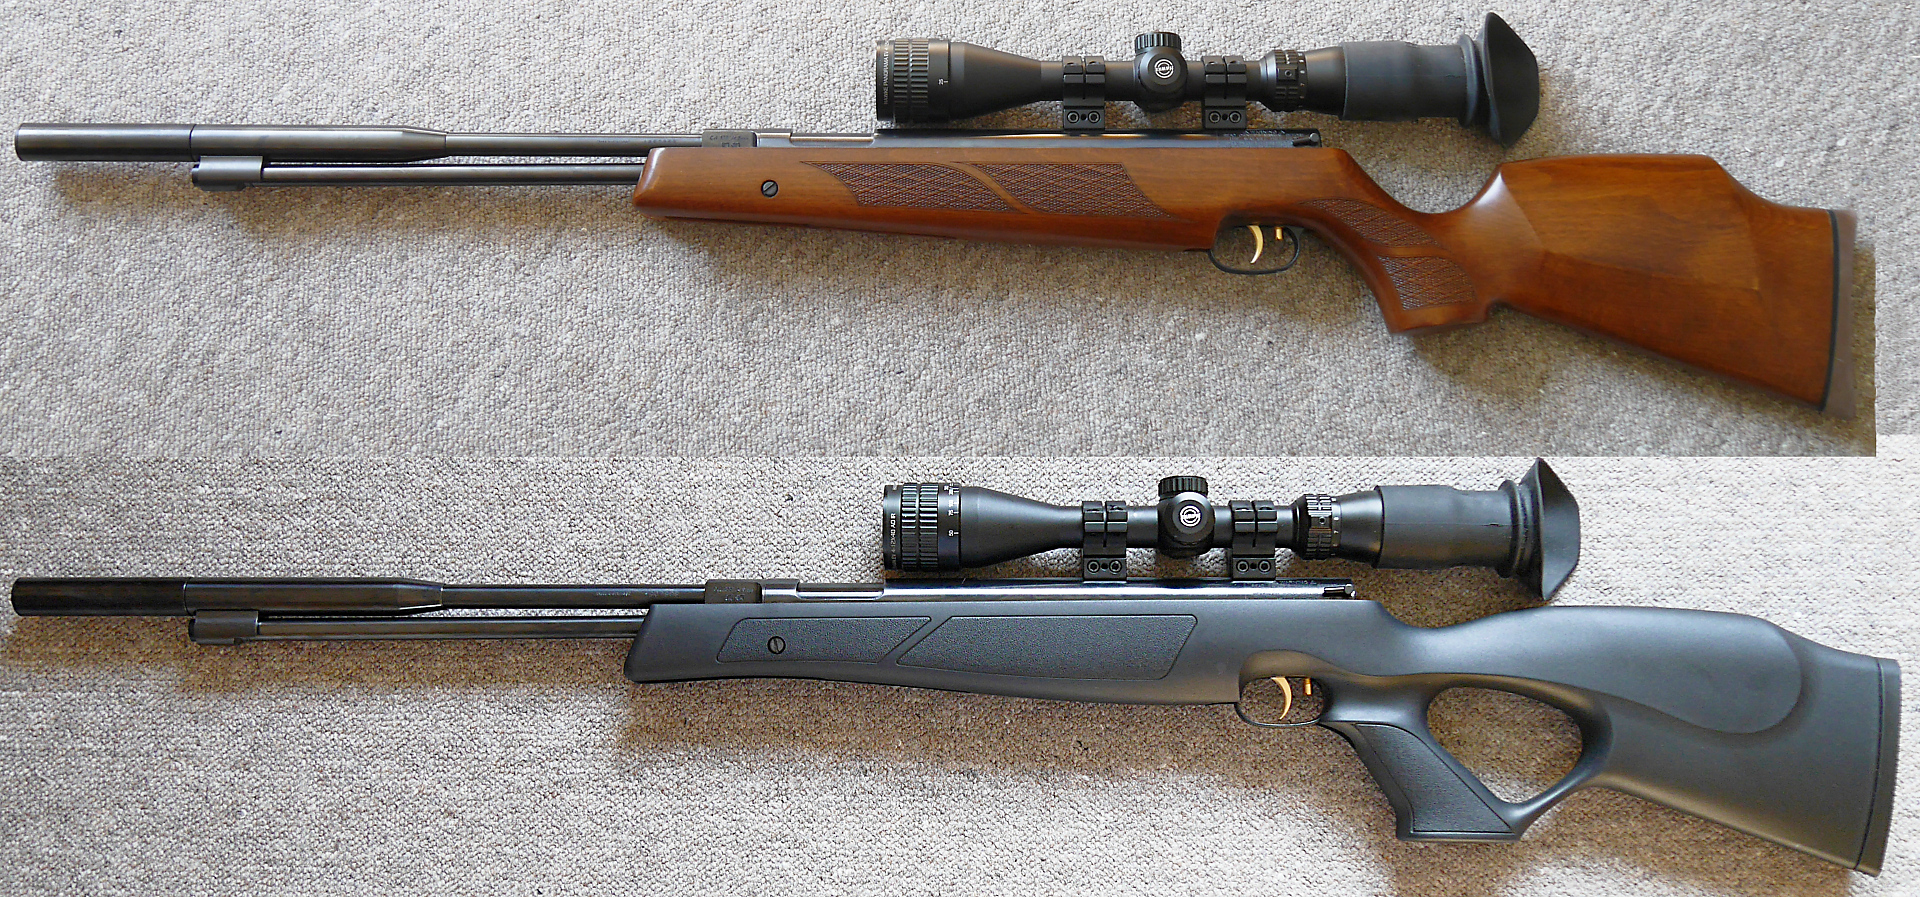 The HW97K V-Glide fitted with both the wood Sporter Stock and the Synthetic Thumbhole stock